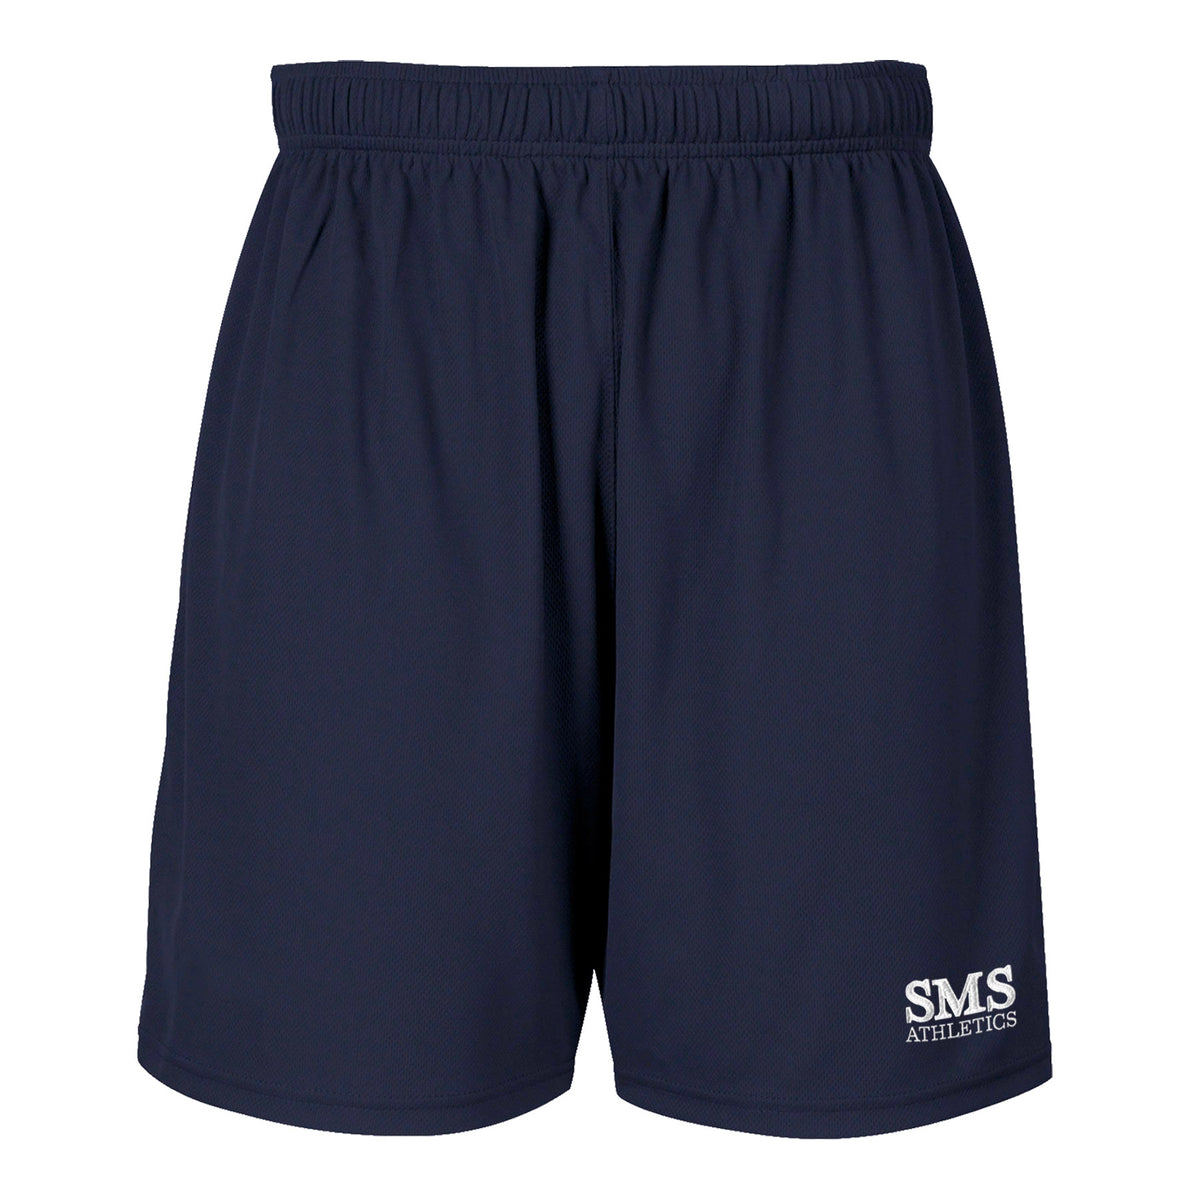 SMS GYM SHORTS, YOUTH